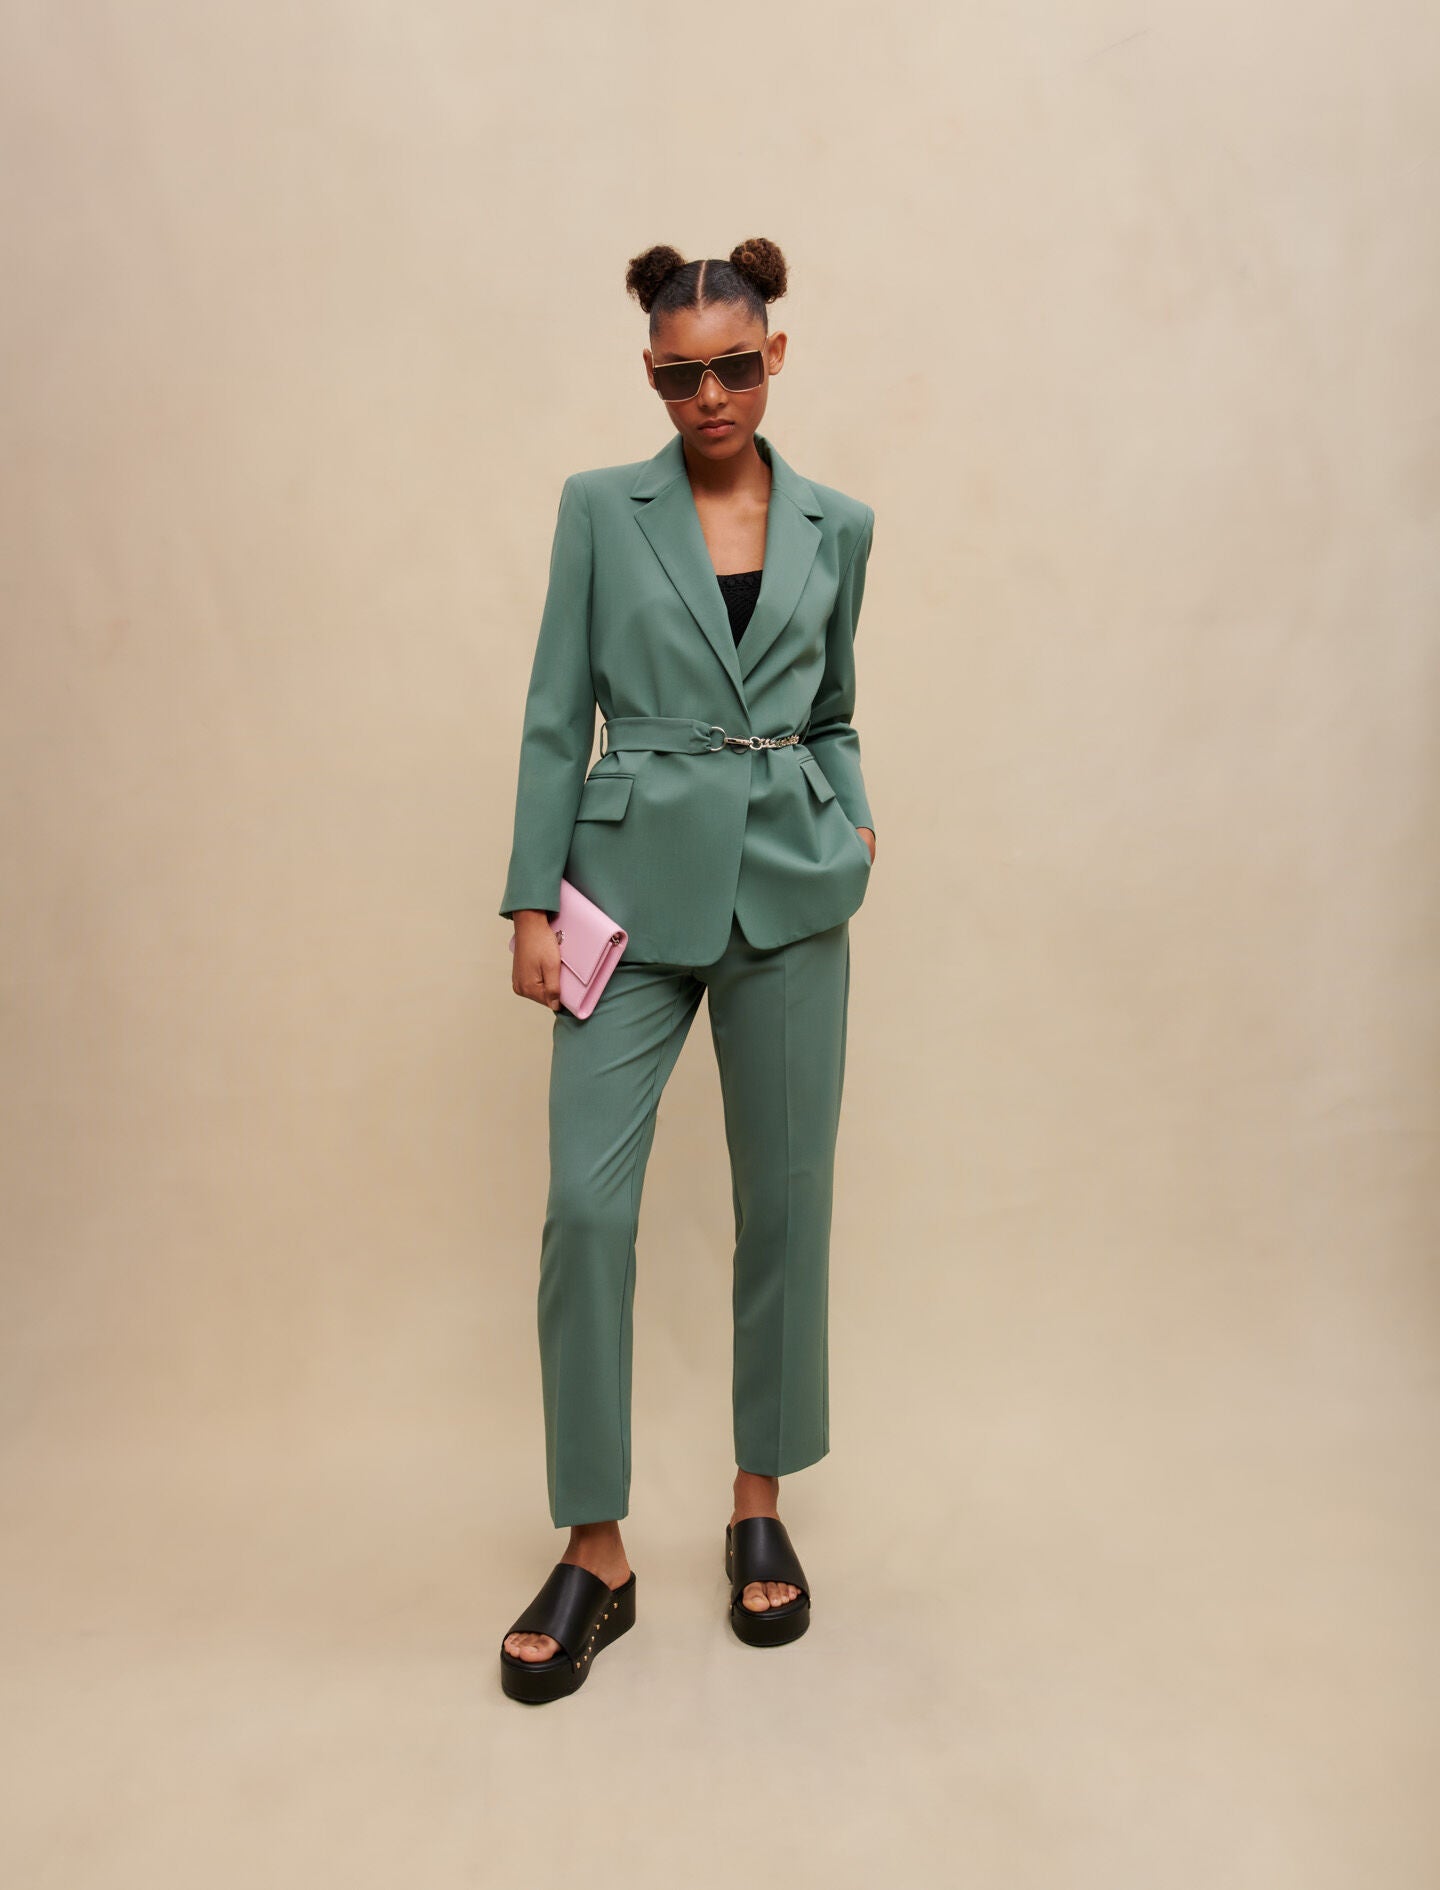 Green-featured-tailored jacket with chain belt